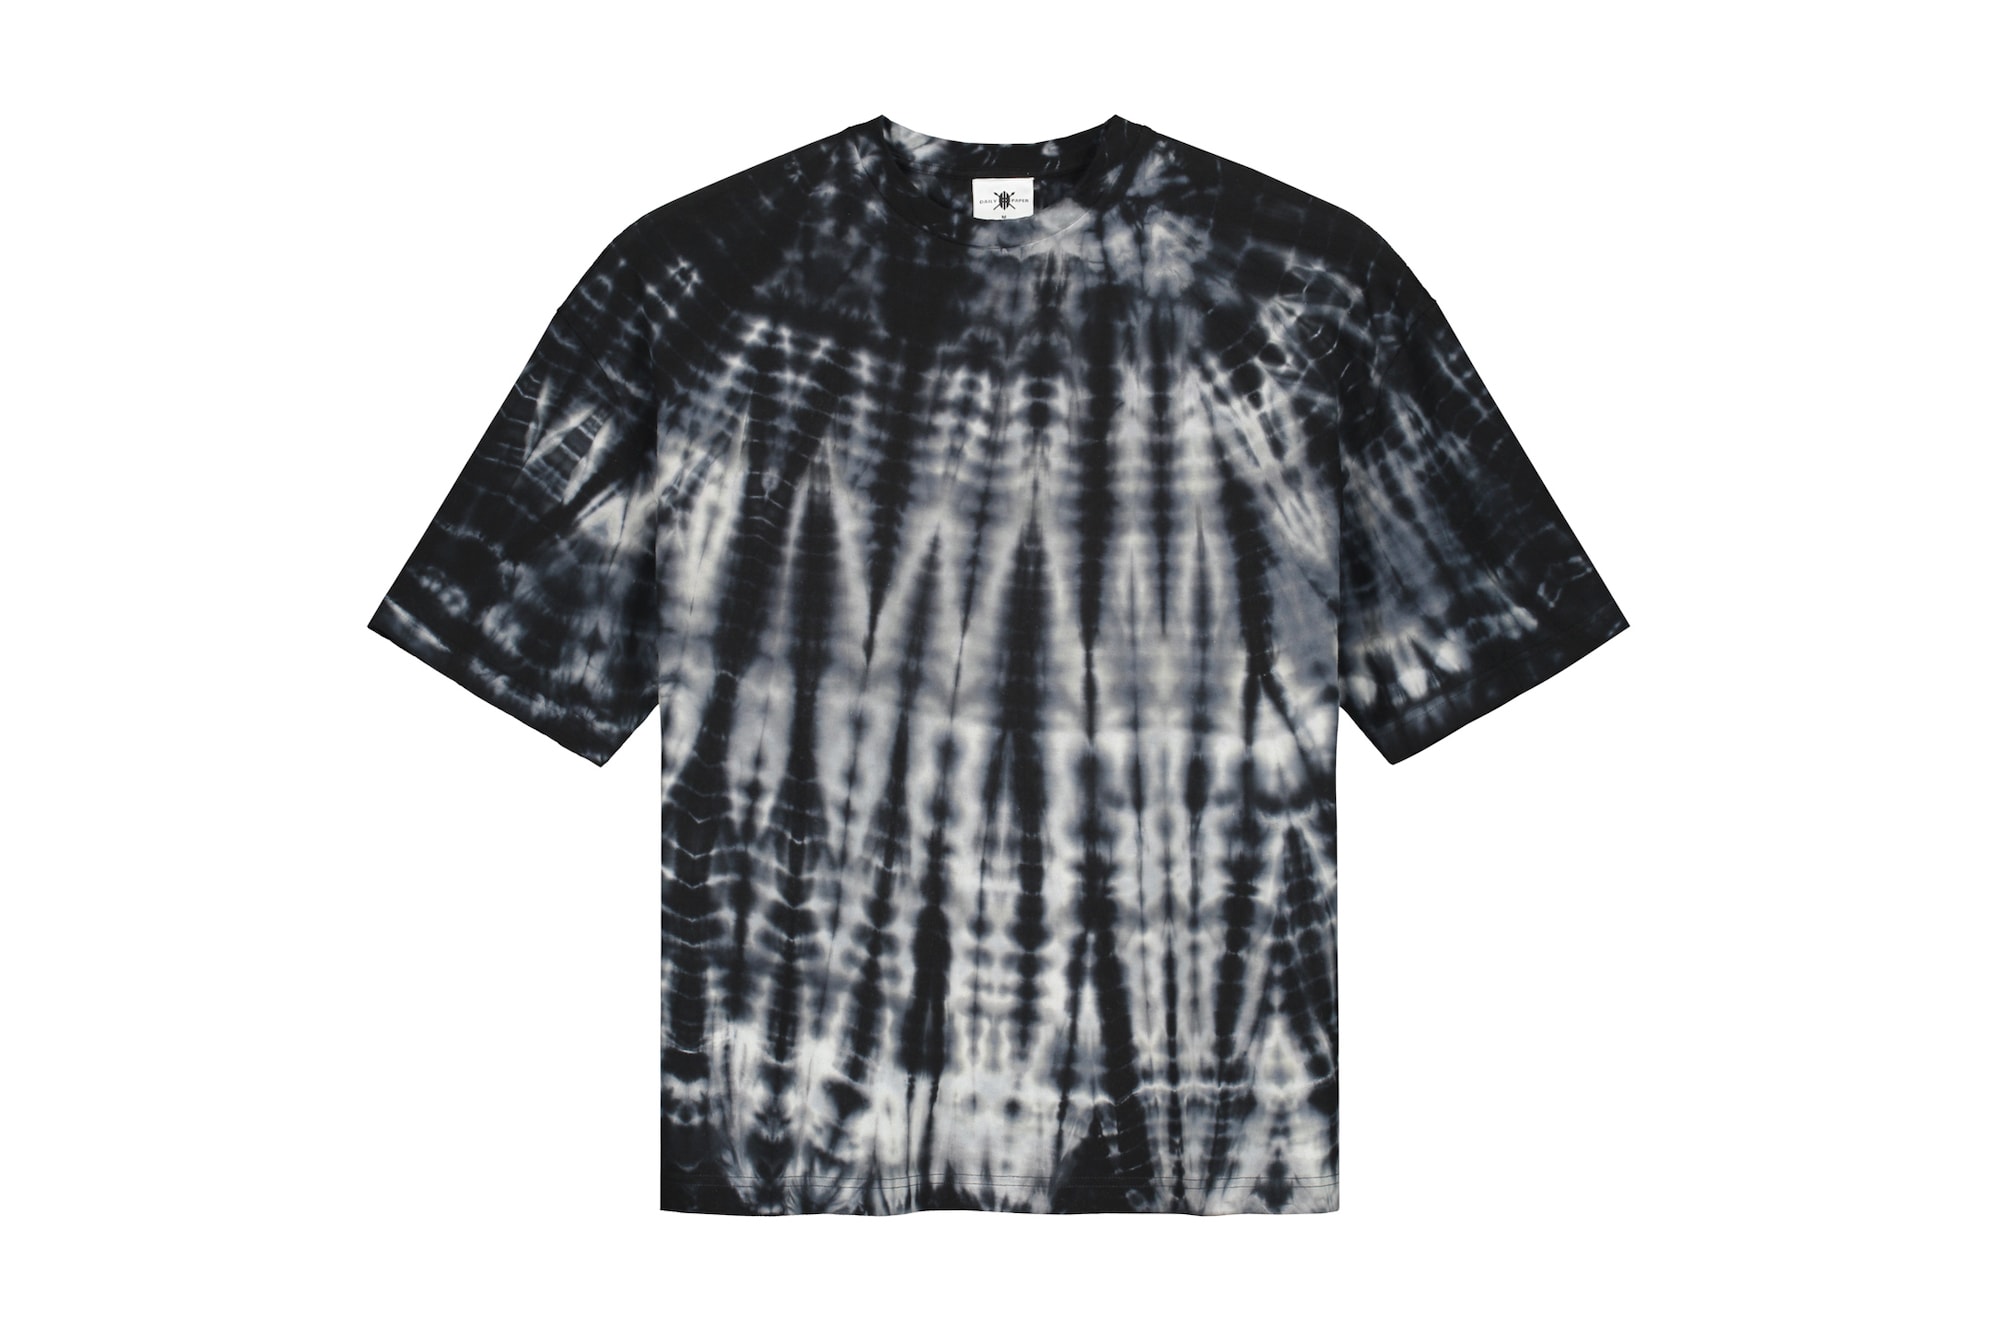 Daily Paper Spring/Summer 2020 Tie Dye Collection Black White Print Pattern Release